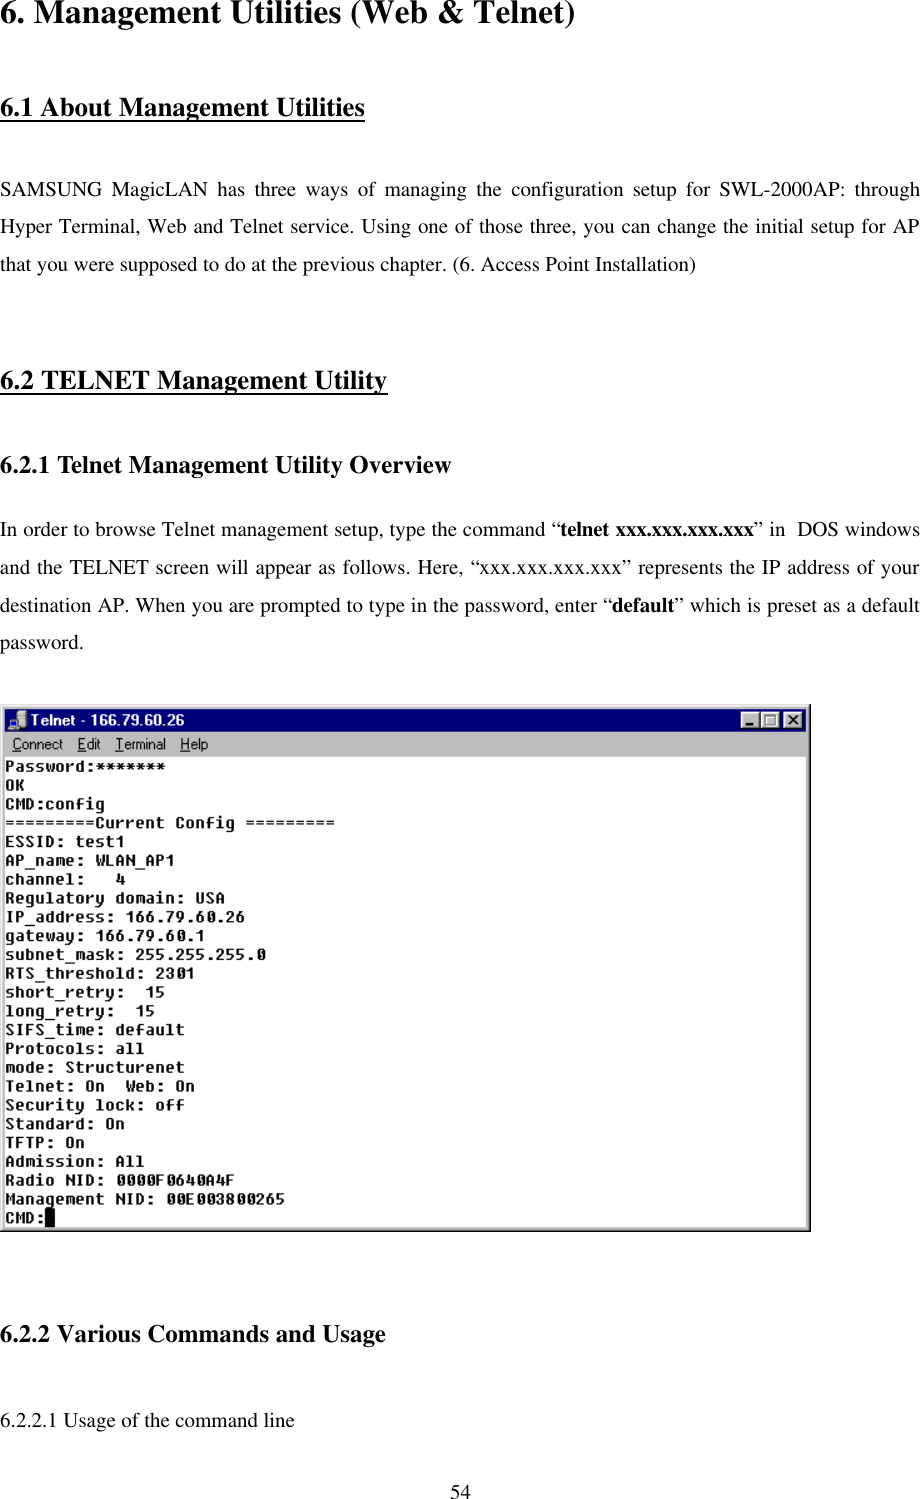  546. Management Utilities (Web &amp; Telnet)  6.1 About Management Utilities  SAMSUNG MagicLAN has three ways of managing the configuration setup for SWL-2000AP: through Hyper Terminal, Web and Telnet service. Using one of those three, you can change the initial setup for AP that you were supposed to do at the previous chapter. (6. Access Point Installation)   6.2 TELNET Management Utility  6.2.1 Telnet Management Utility Overview  In order to browse Telnet management setup, type the command “telnet xxx.xxx.xxx.xxx” in  DOS windows and the TELNET screen will appear as follows. Here, “xxx.xxx.xxx.xxx” represents the IP address of your destination AP. When you are prompted to type in the password, enter “default” which is preset as a default password.     6.2.2 Various Commands and Usage  6.2.2.1 Usage of the command line 